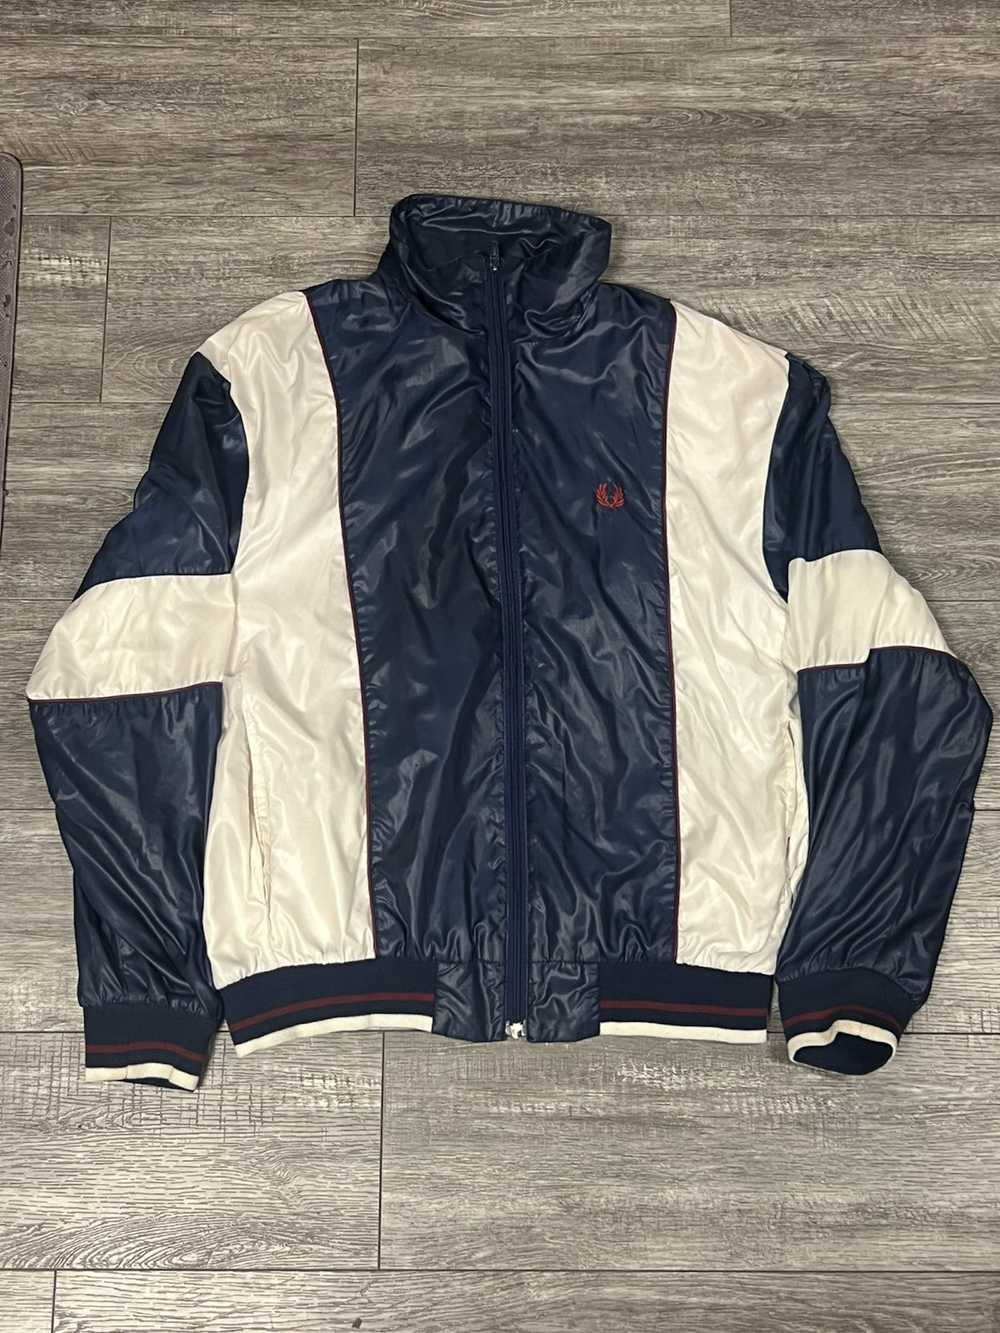 Fred Perry 90s Vintage FRED PERRY Windbreaker Jac… - image 1